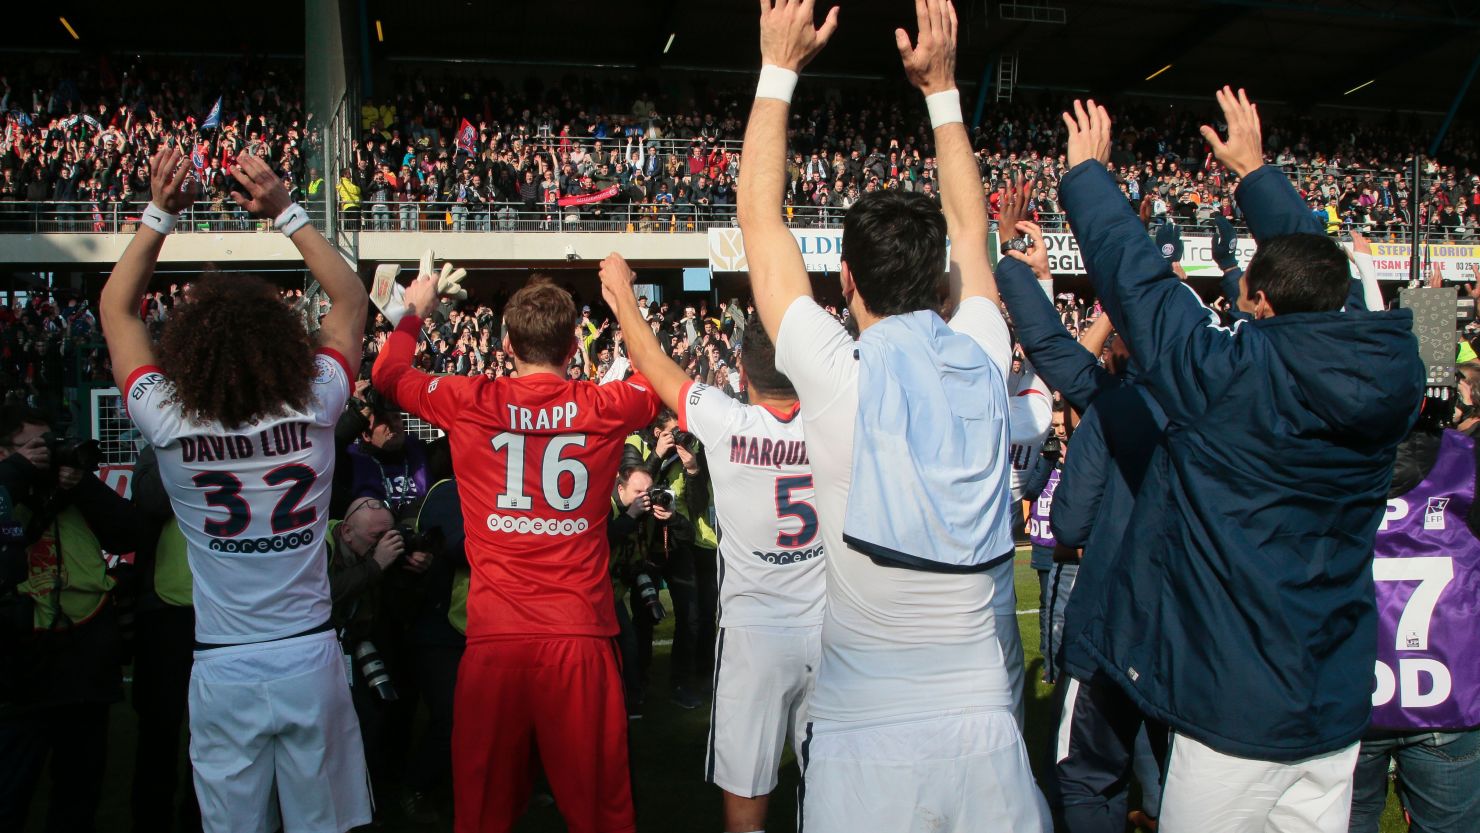 Paris Saint-Germain's team celebrates with its supporters after clinching its fourth straight Ligue 1 title and sixth overall.